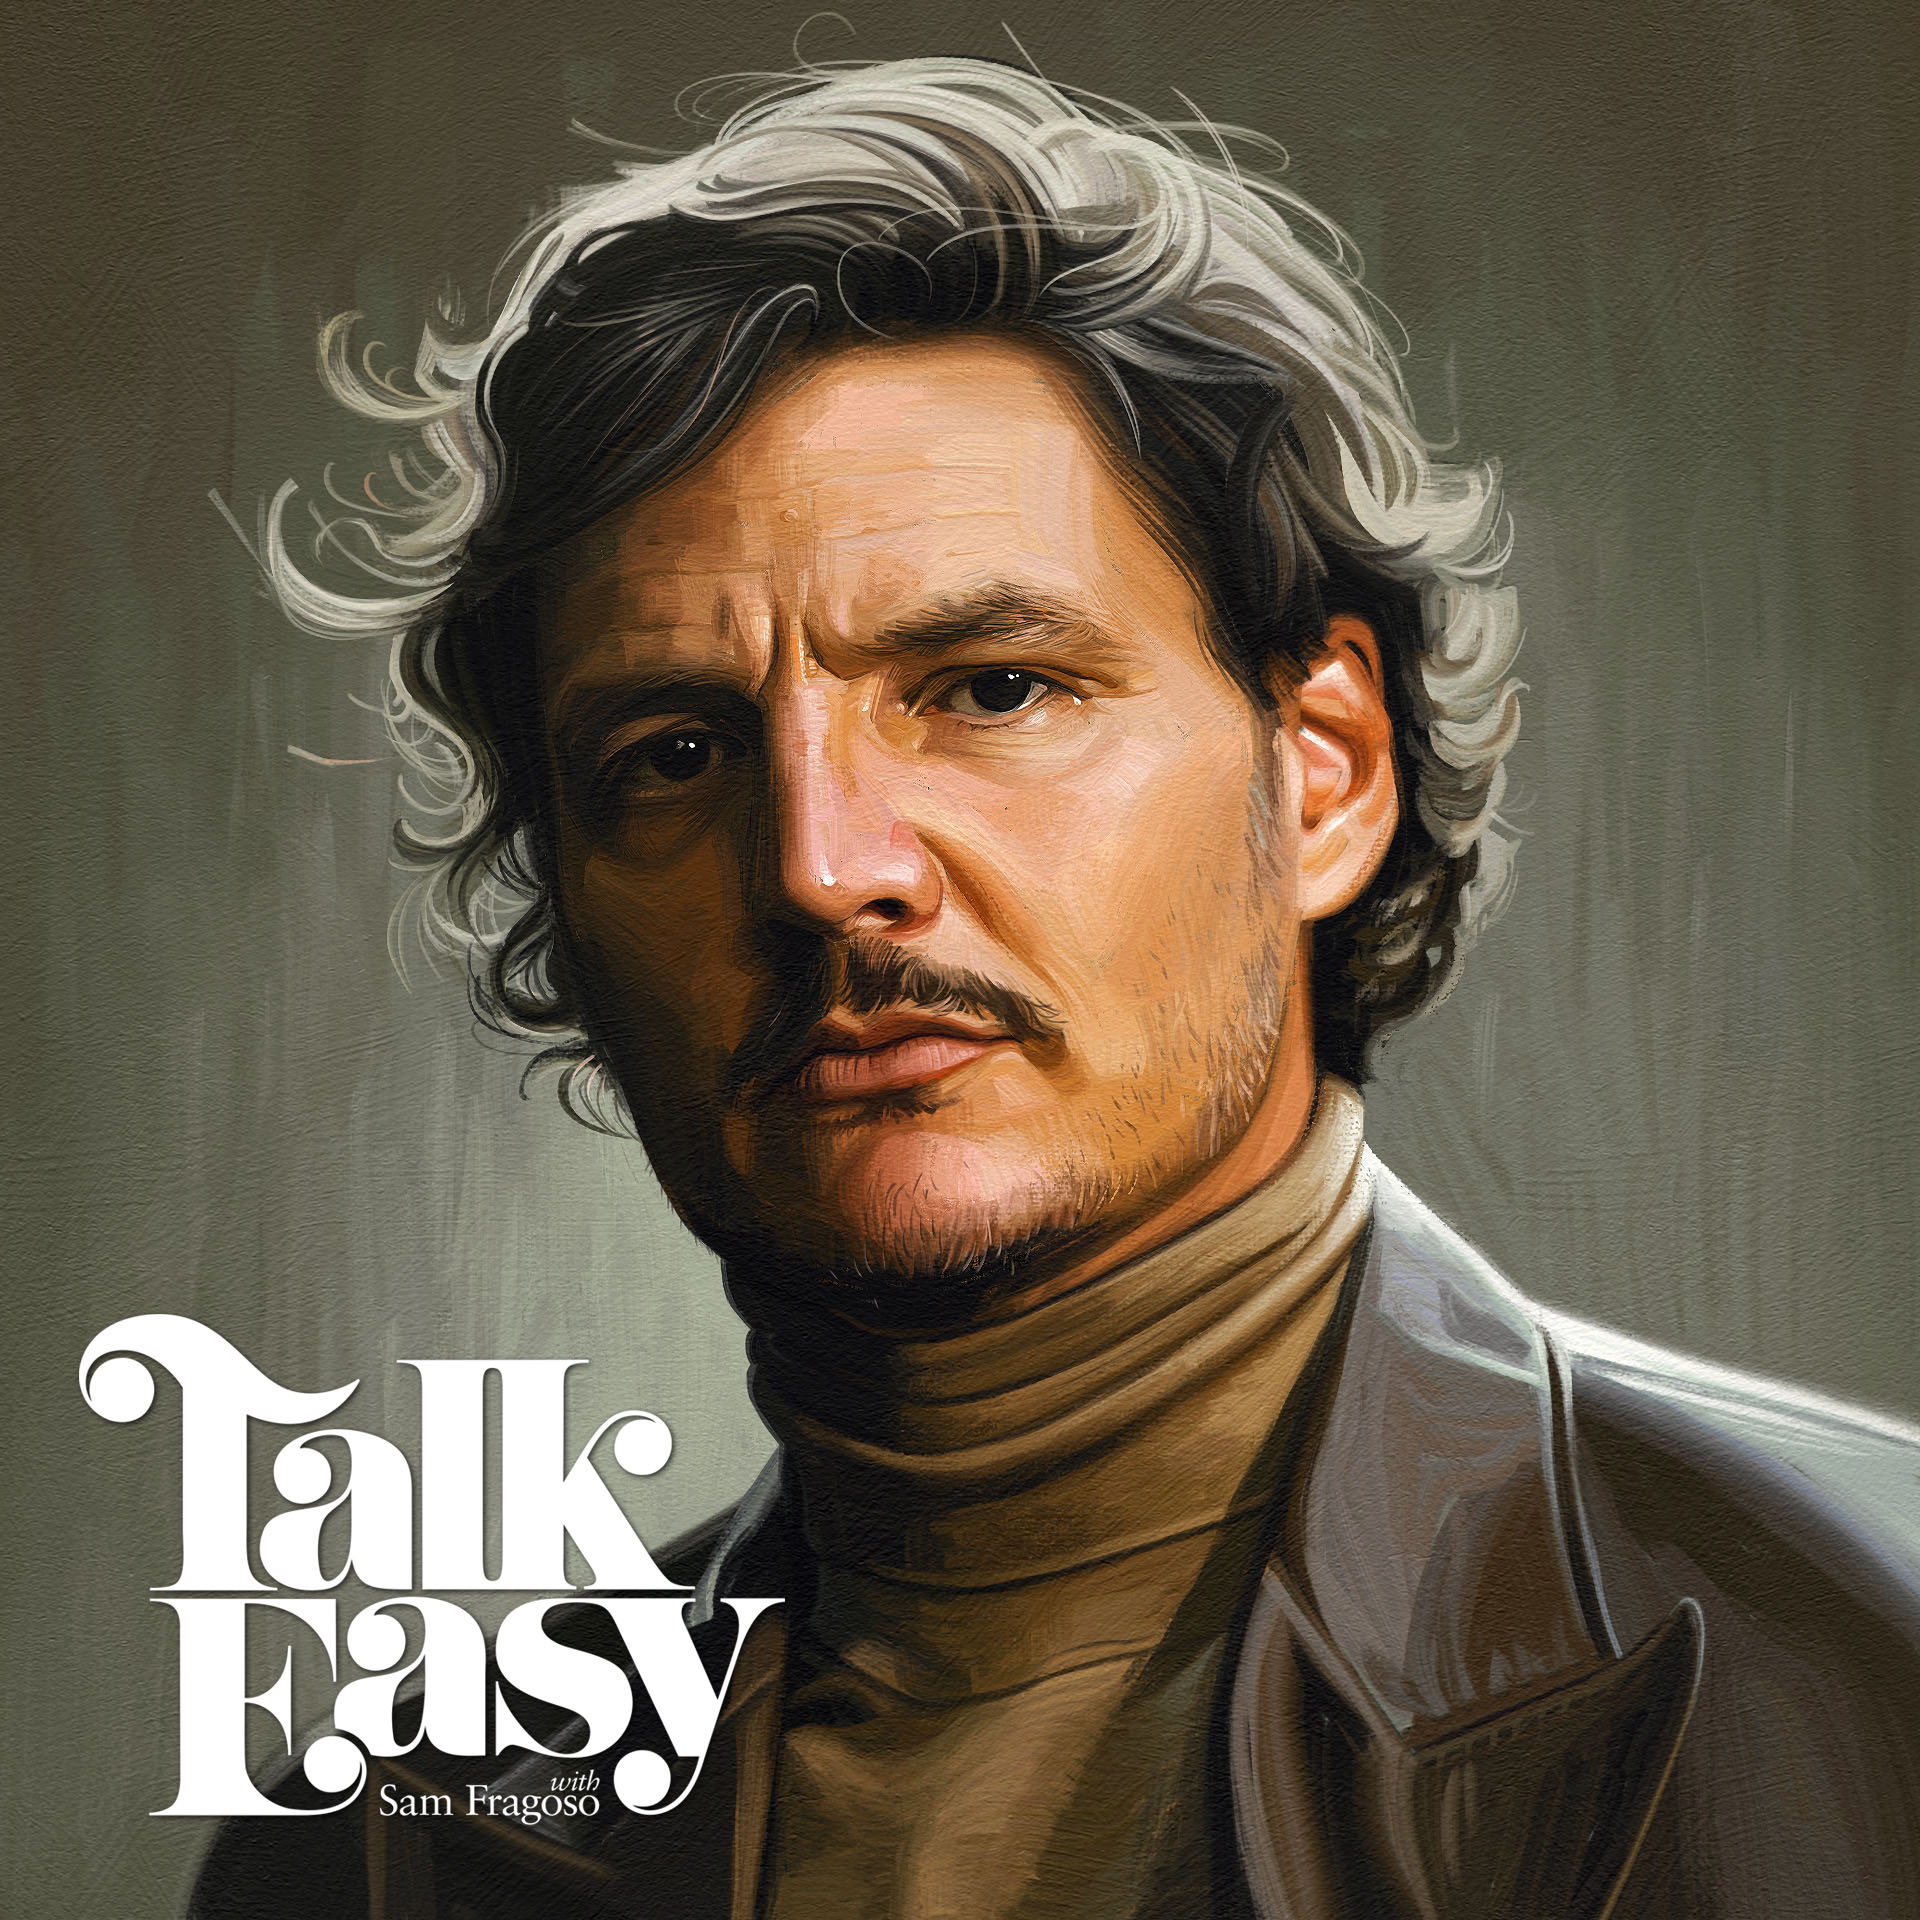 The Year of Actor Pedro Pascal